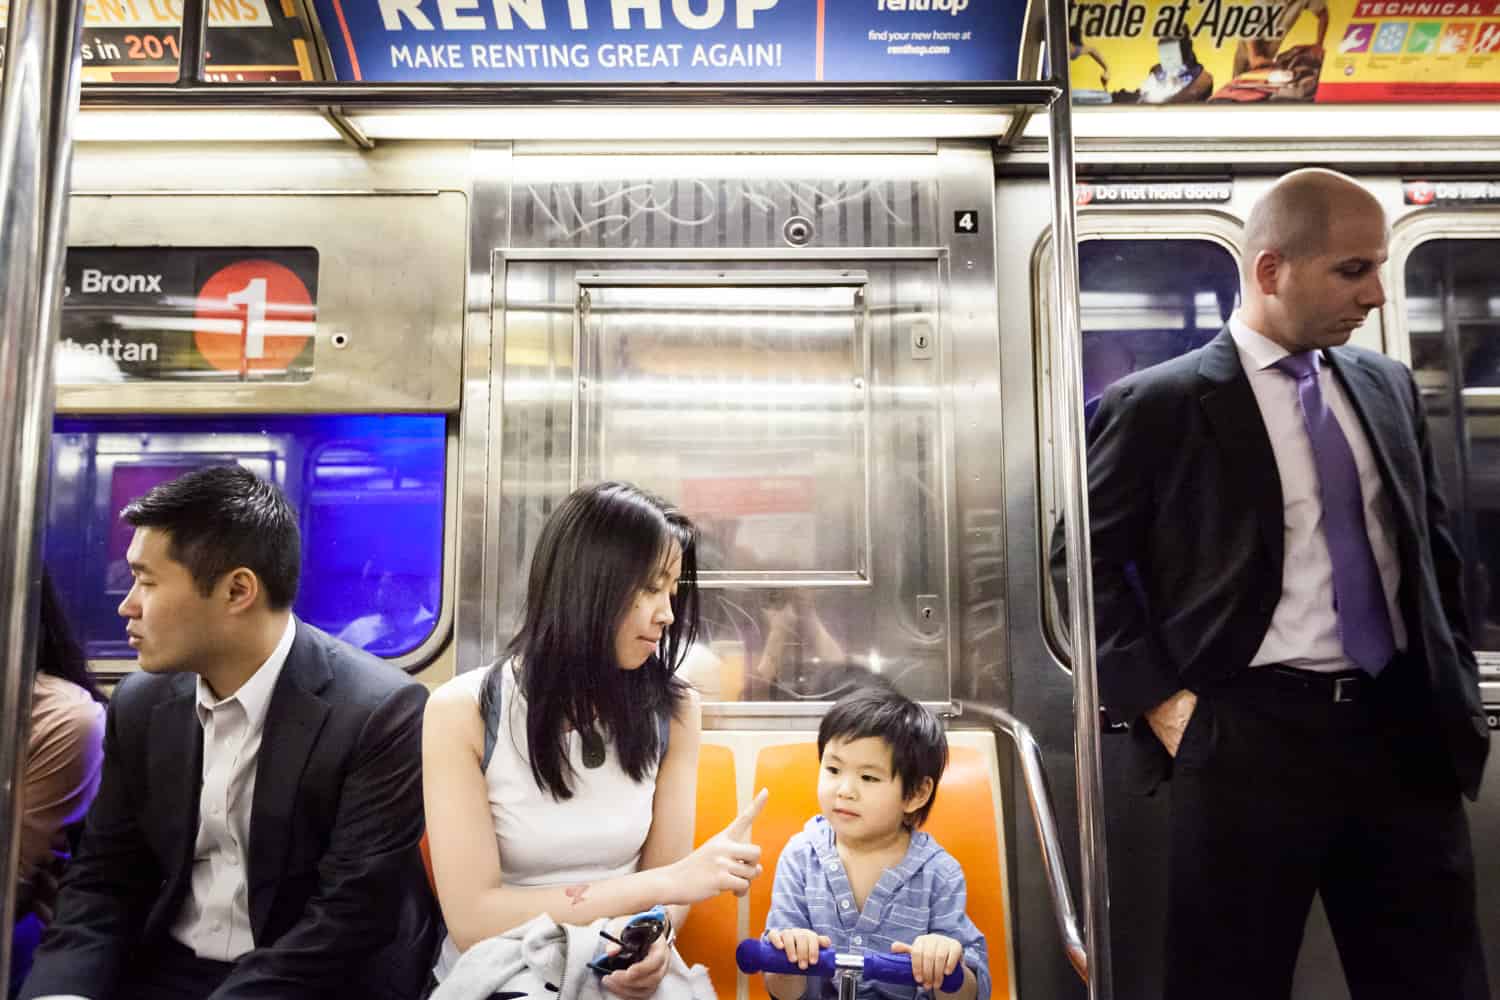 Mother and little boy sitting on subway train during a day in the life photography session